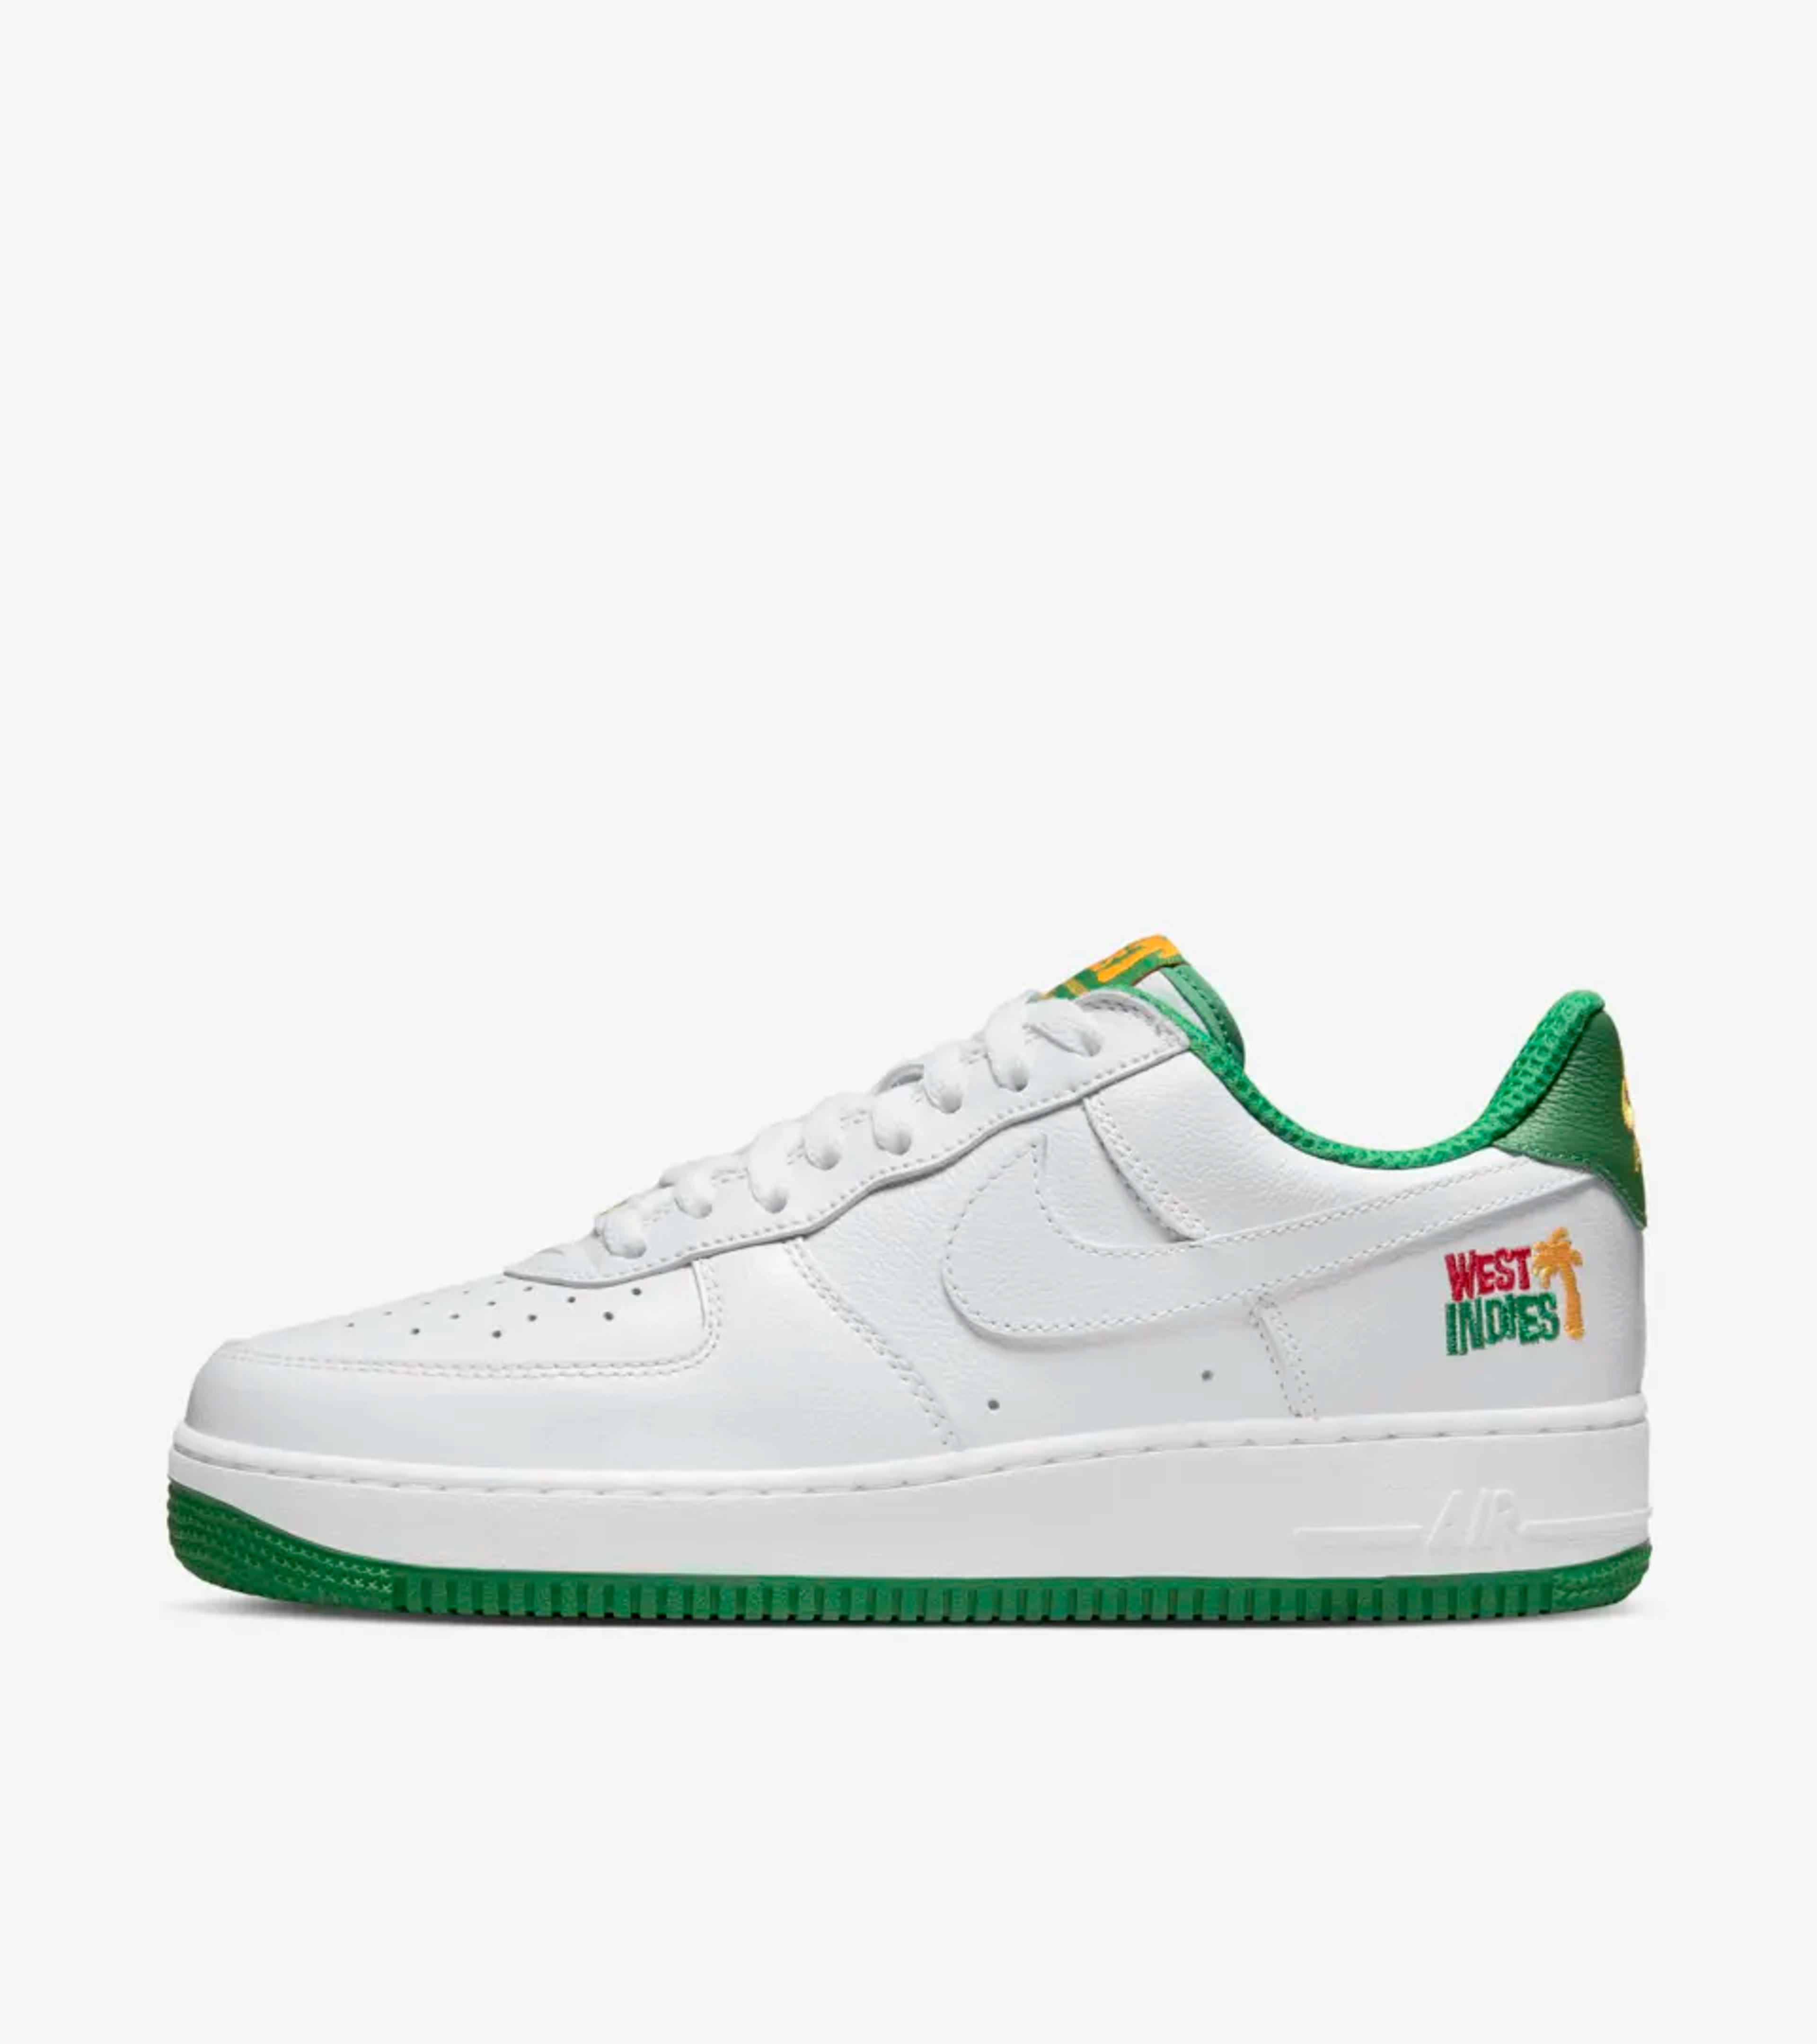 Air Force 1 'West Indies' (DX1156-100) Release Date. Nike SNKRS